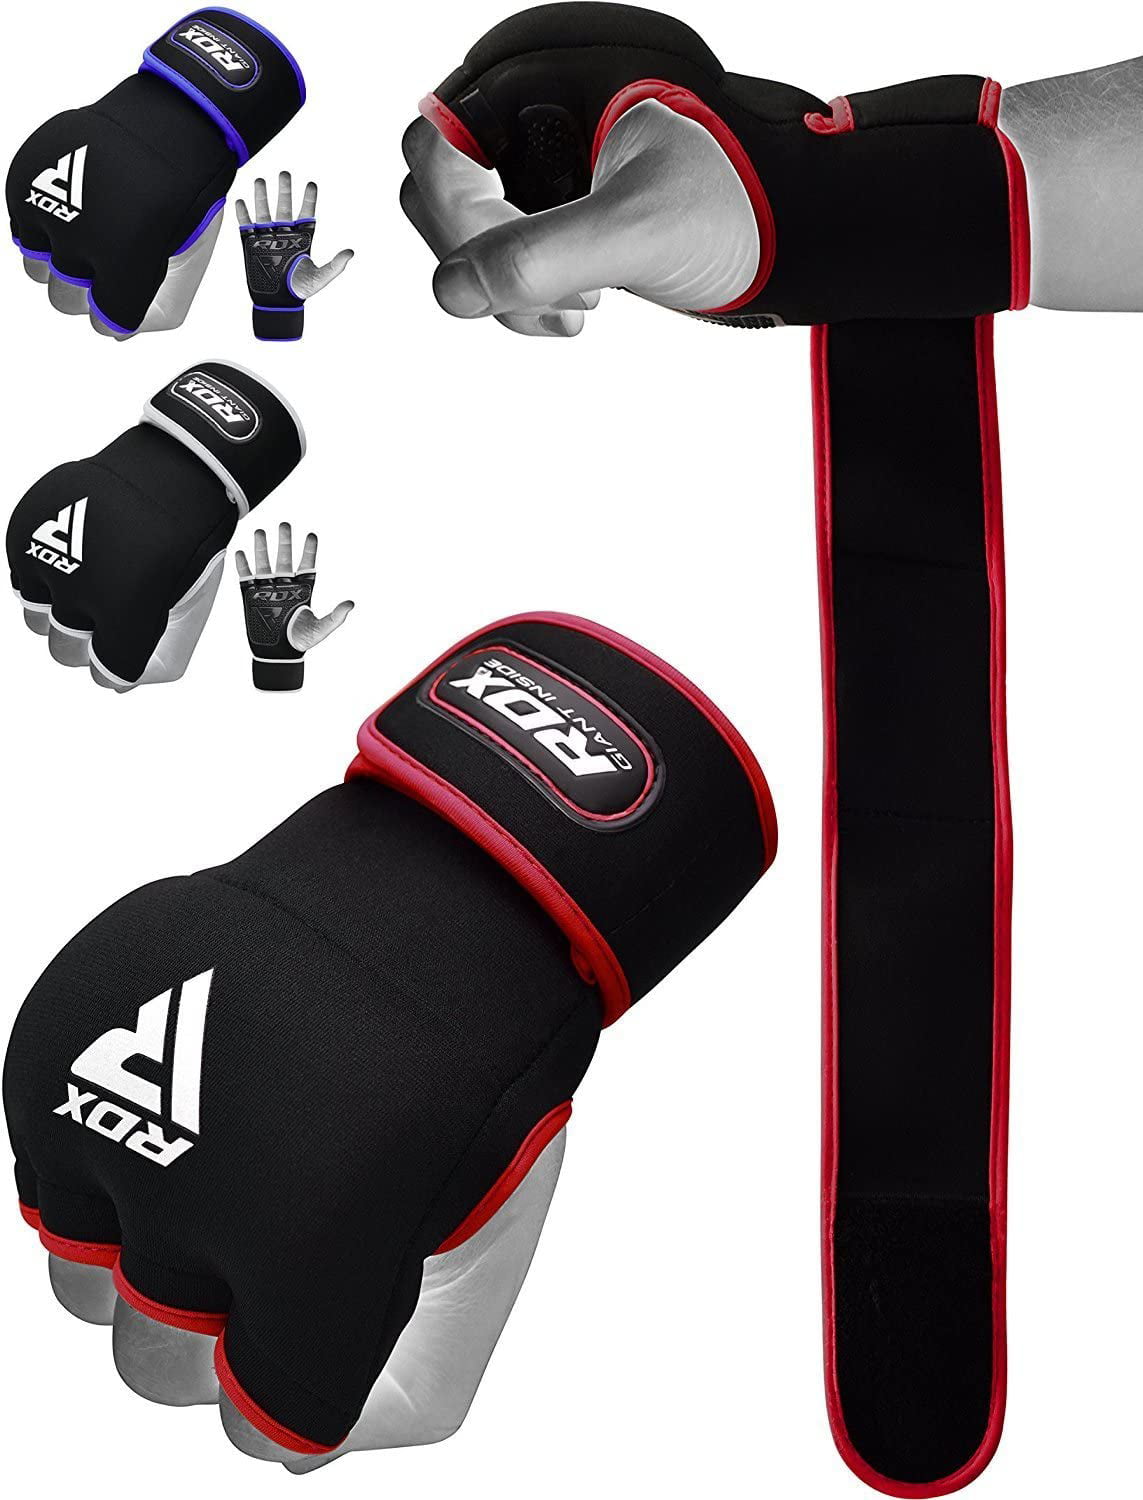 Boxing Hand Wraps Training Muay Thai Punch Bag Inner Gloves Protector Bandages 